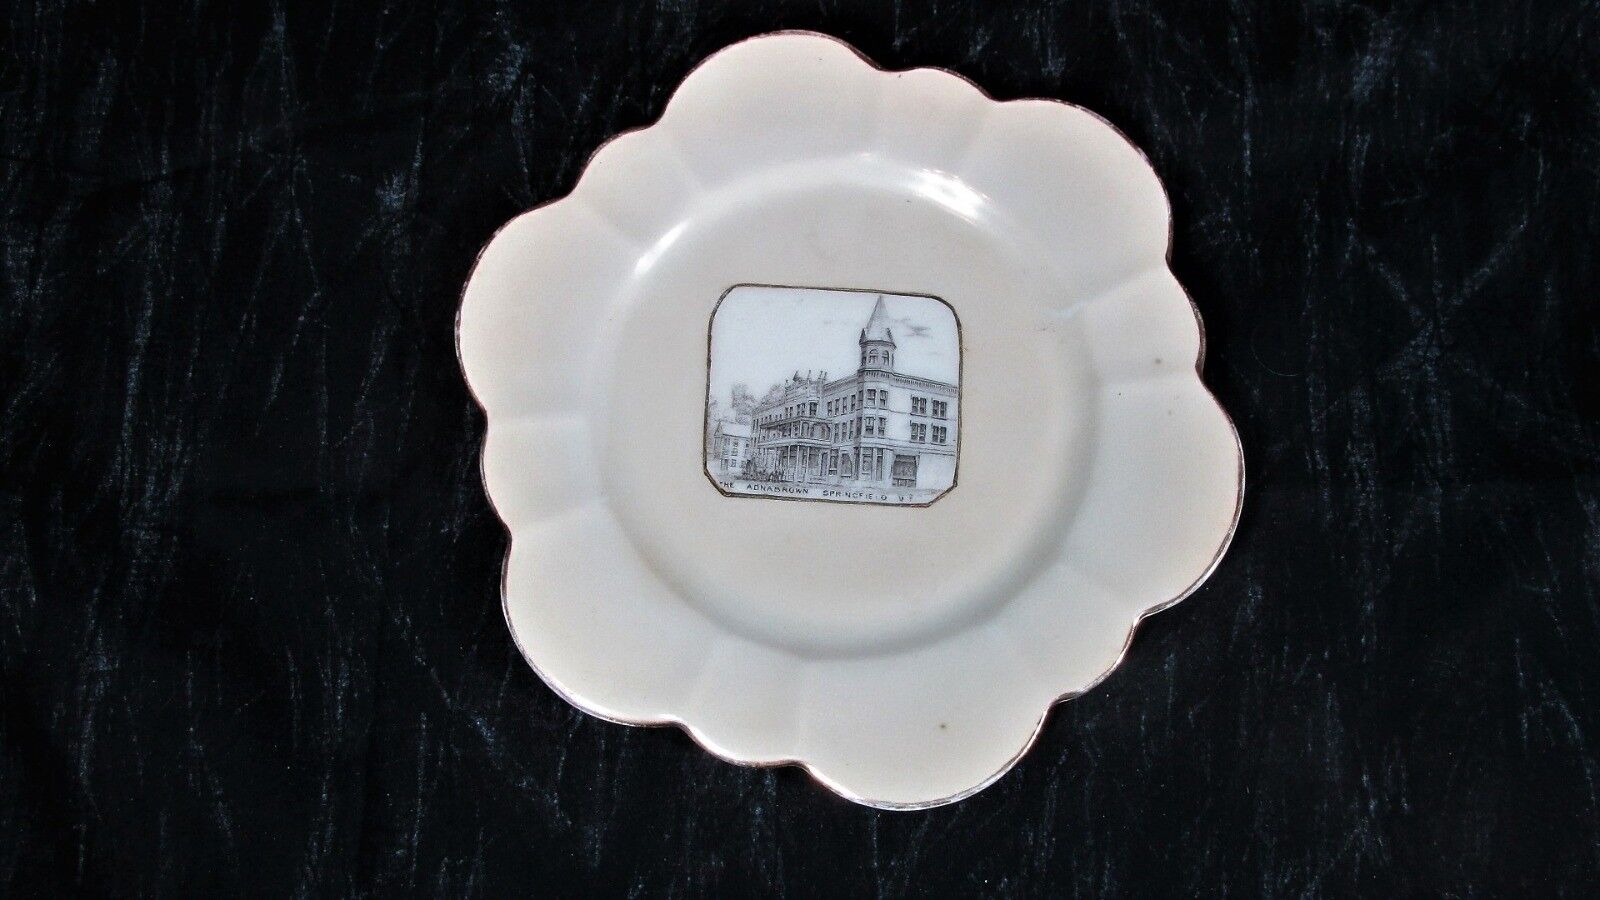 Antique Springfield VT The ADNABROWN Hotel Plate, Made in Germany 